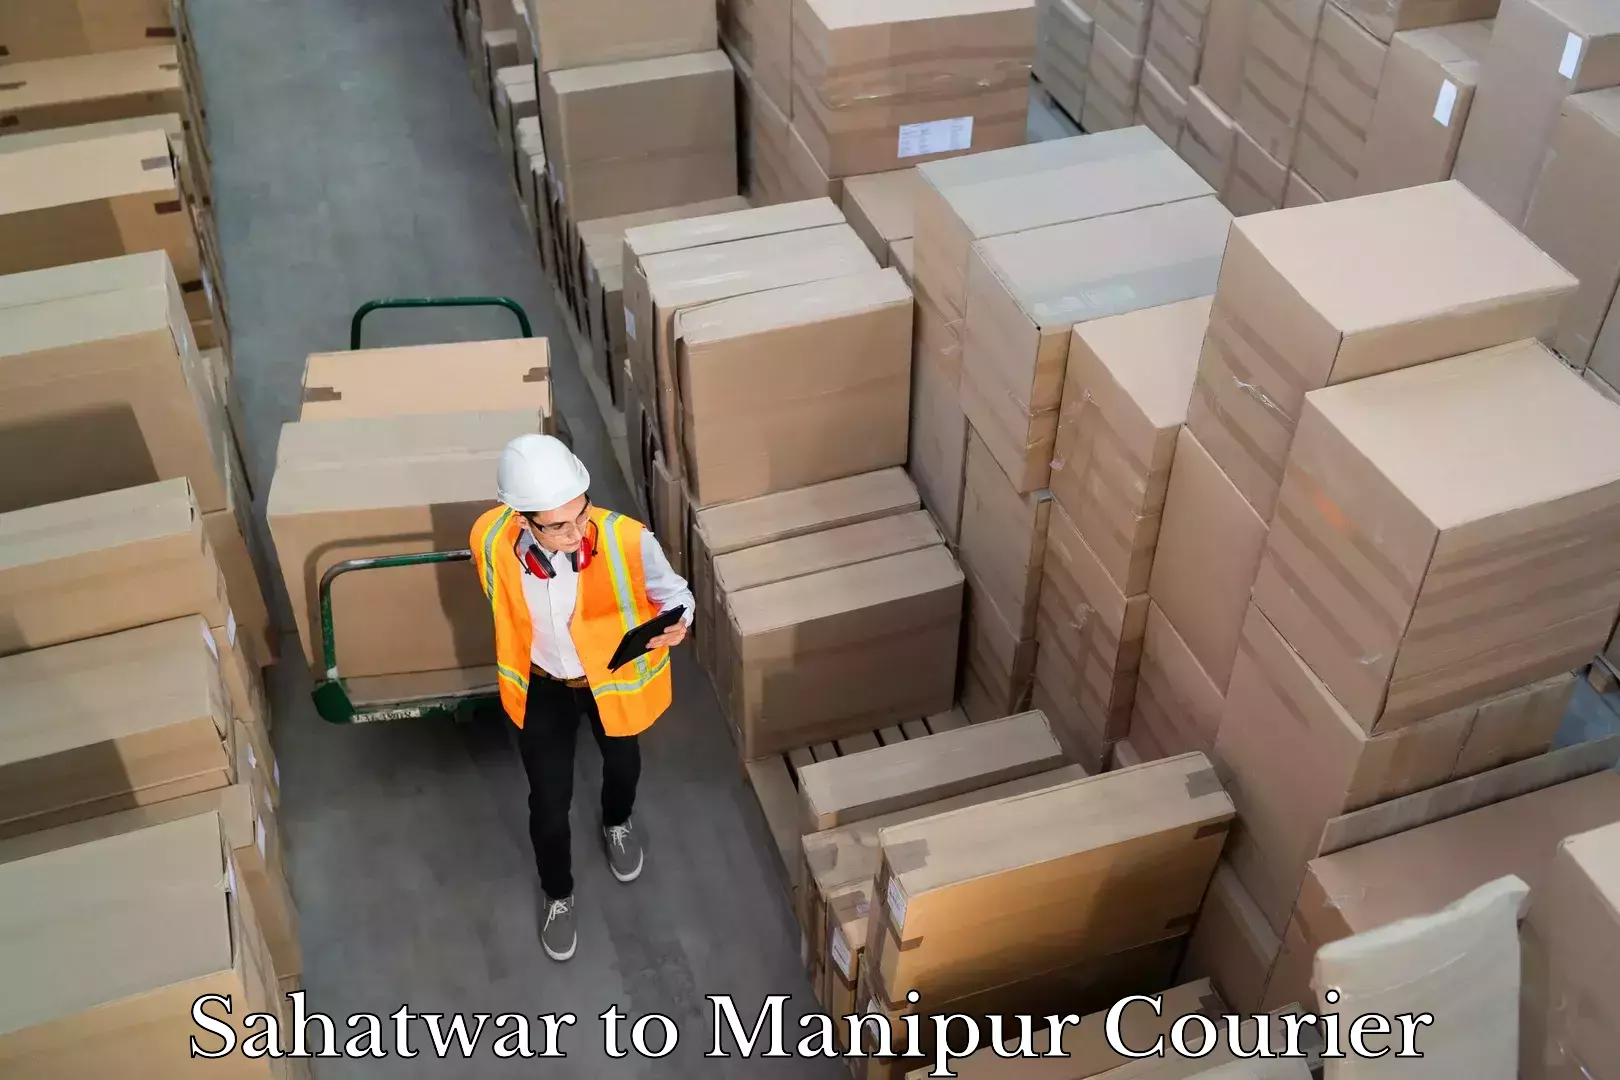 Flexible delivery schedules Sahatwar to Manipur